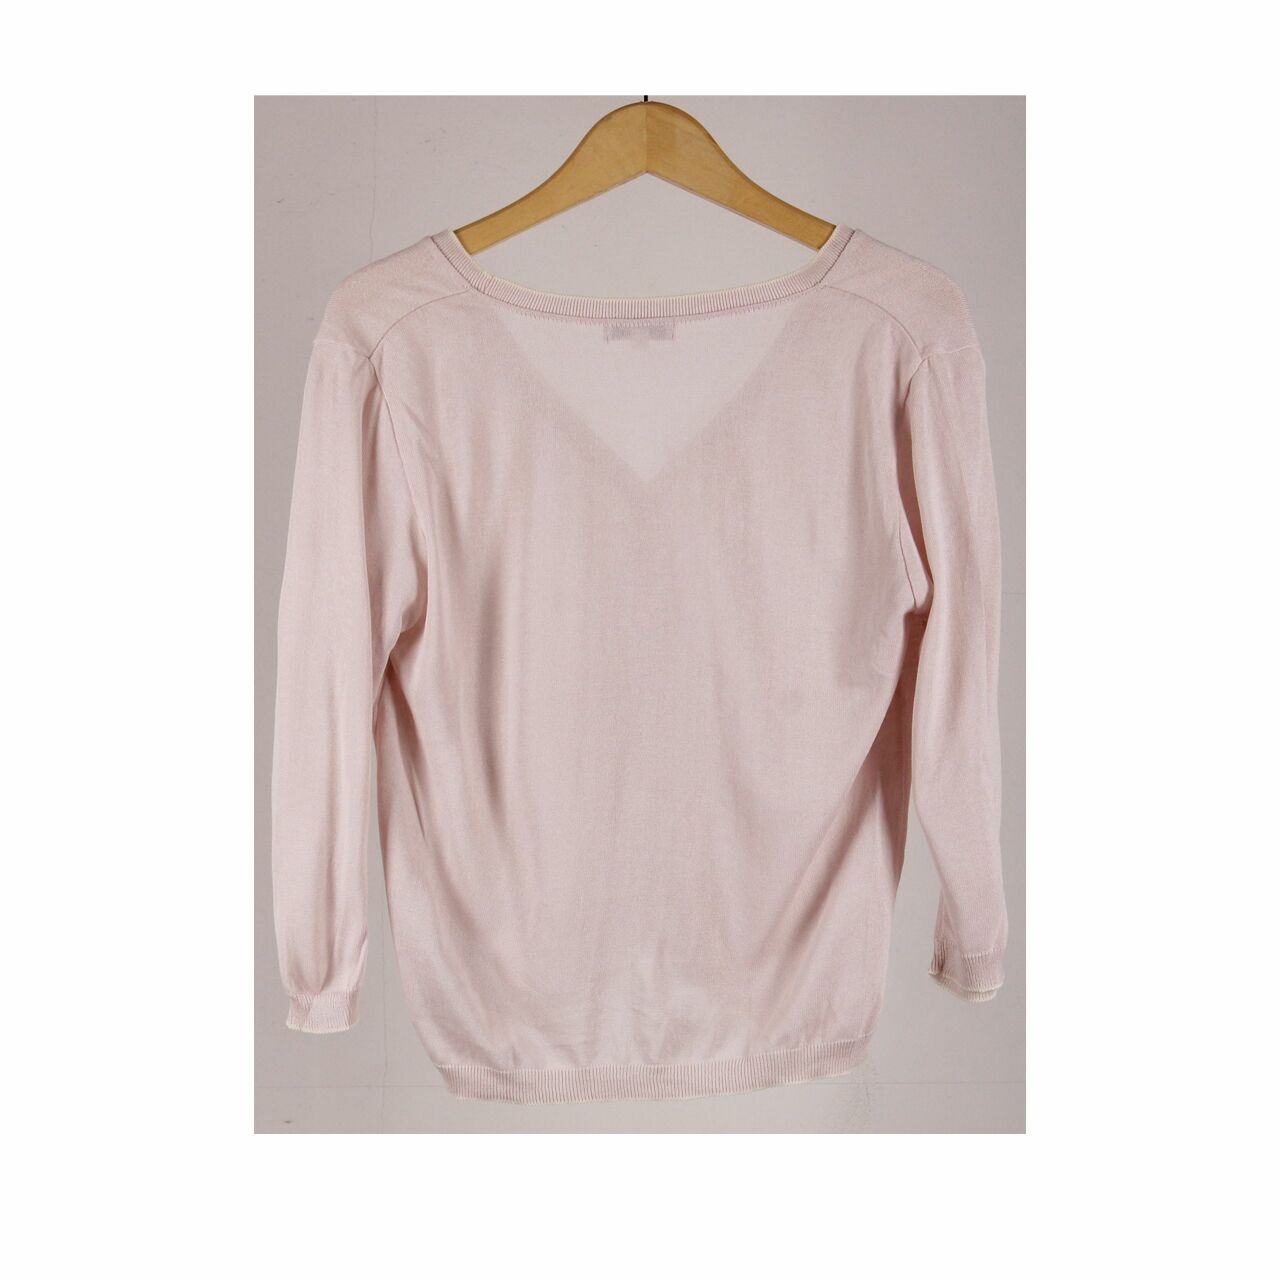 Marie Claire Soft Pink Cardigan